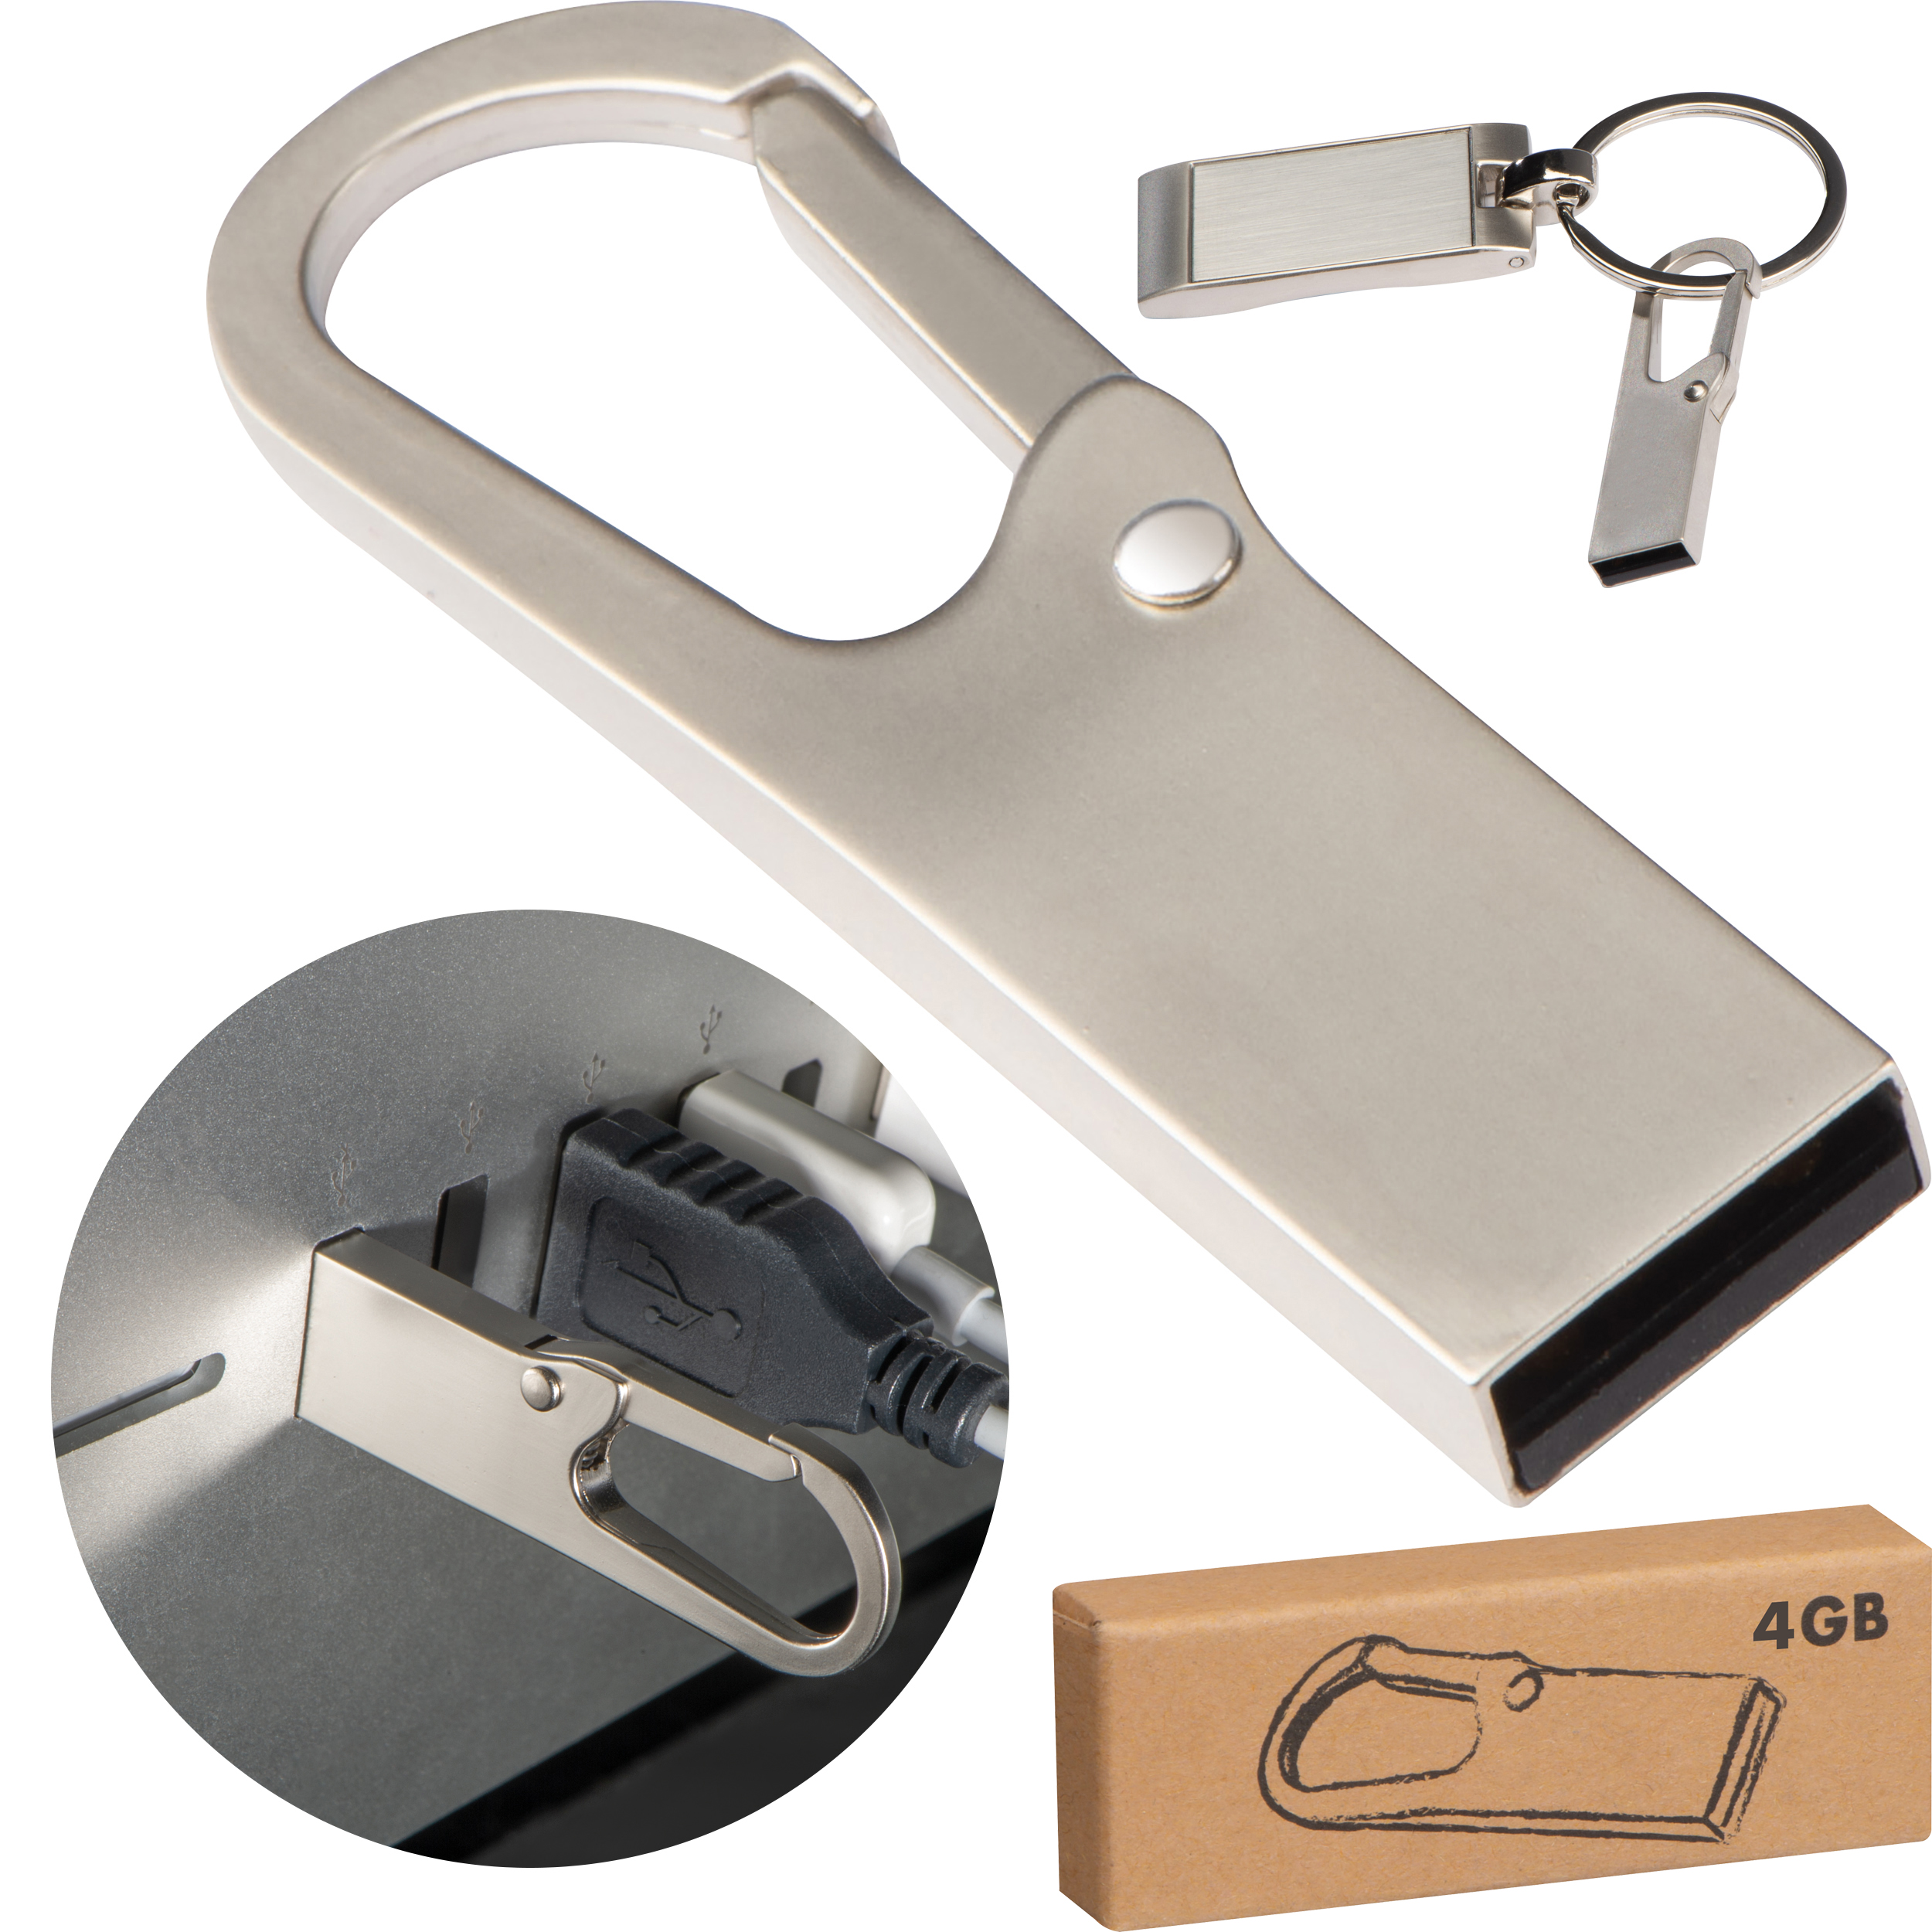 Metal USB stick with carabiner - 4GB